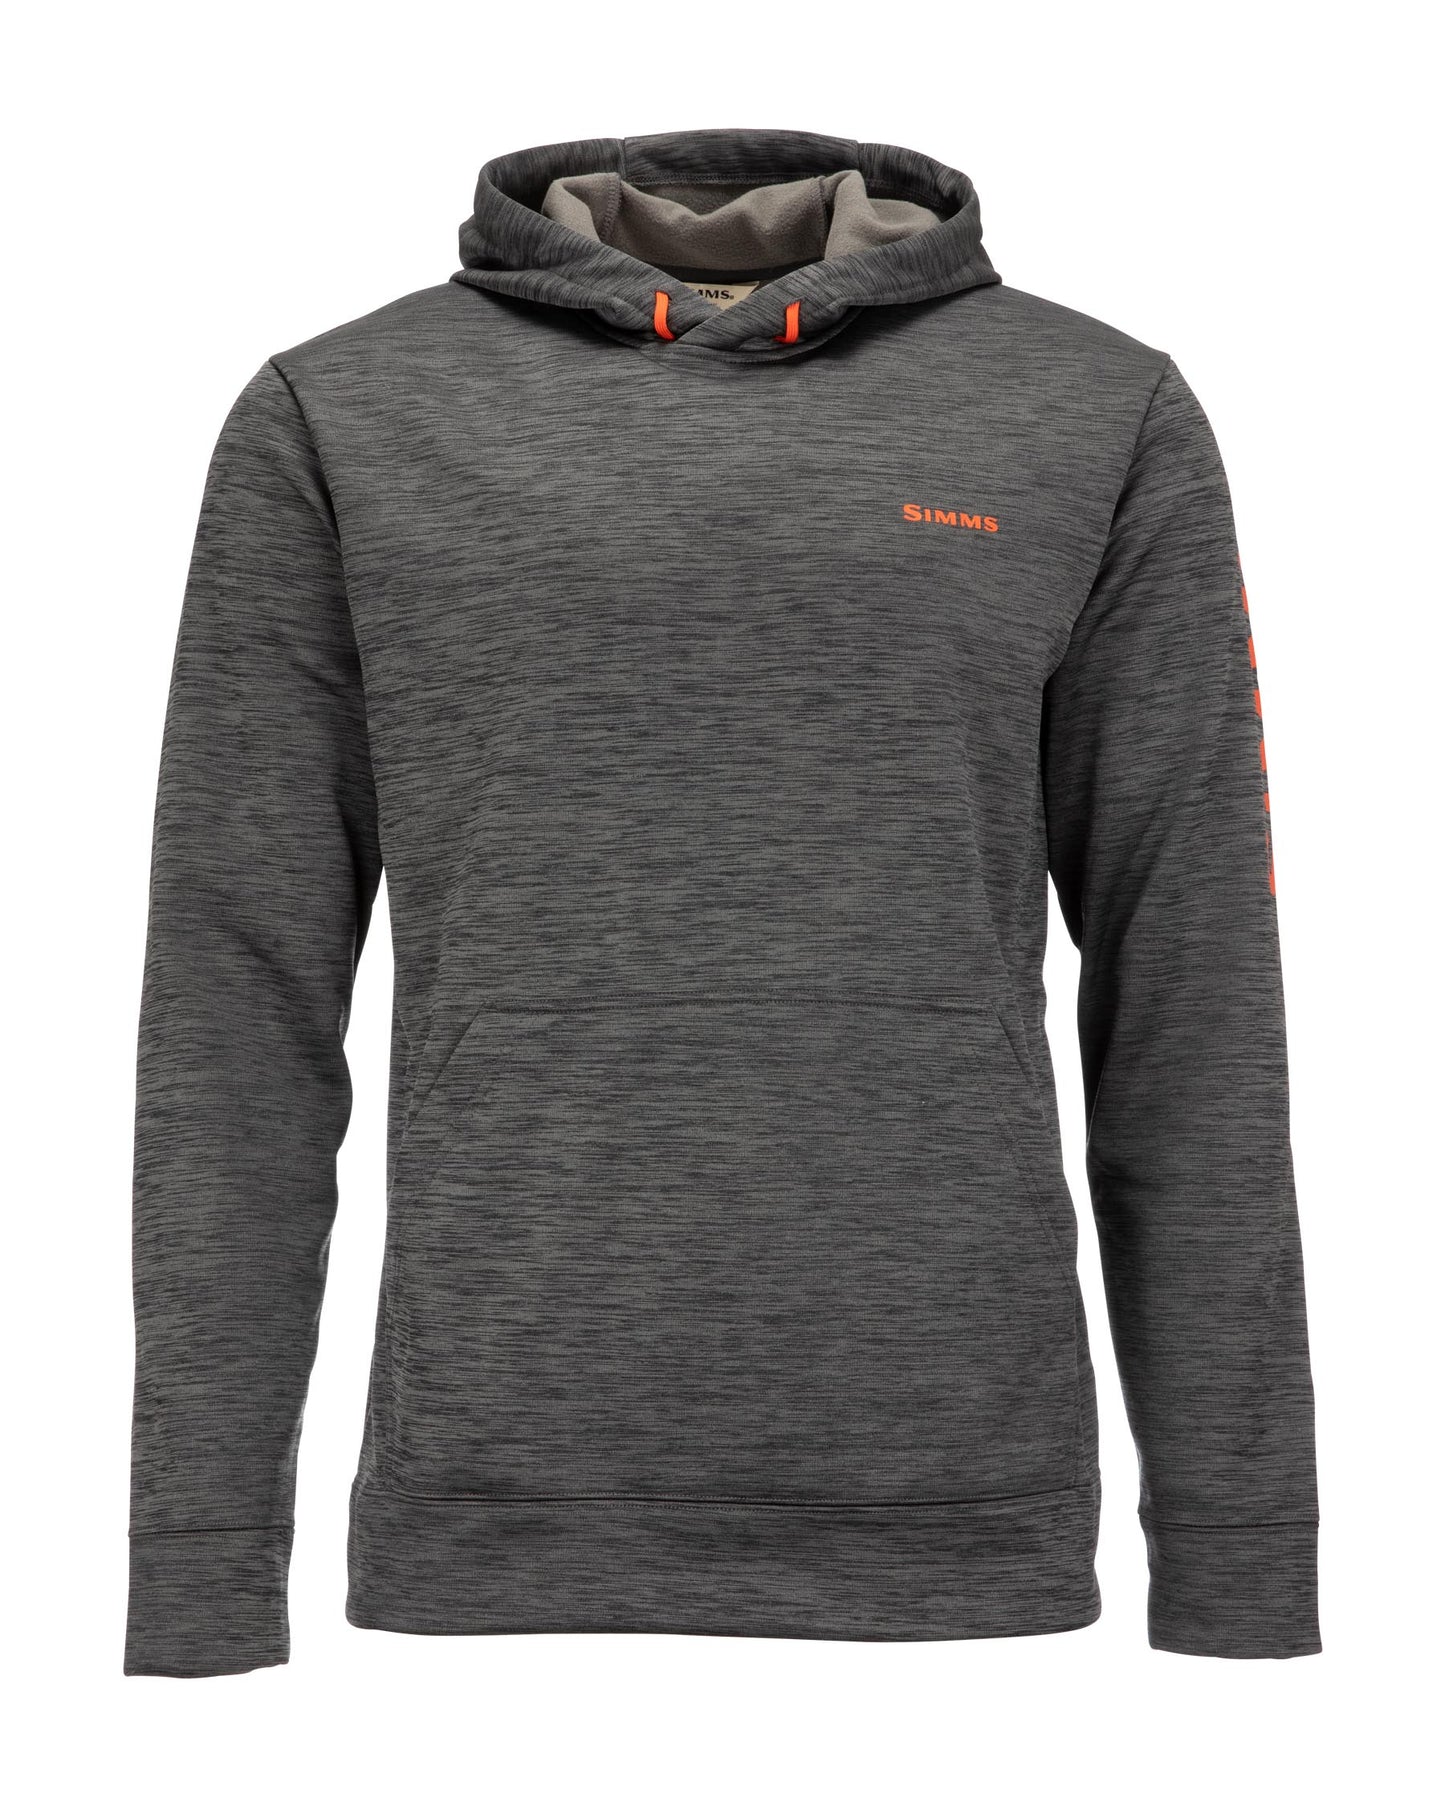 M's Simms Challenger Hoody - Carbon Heather